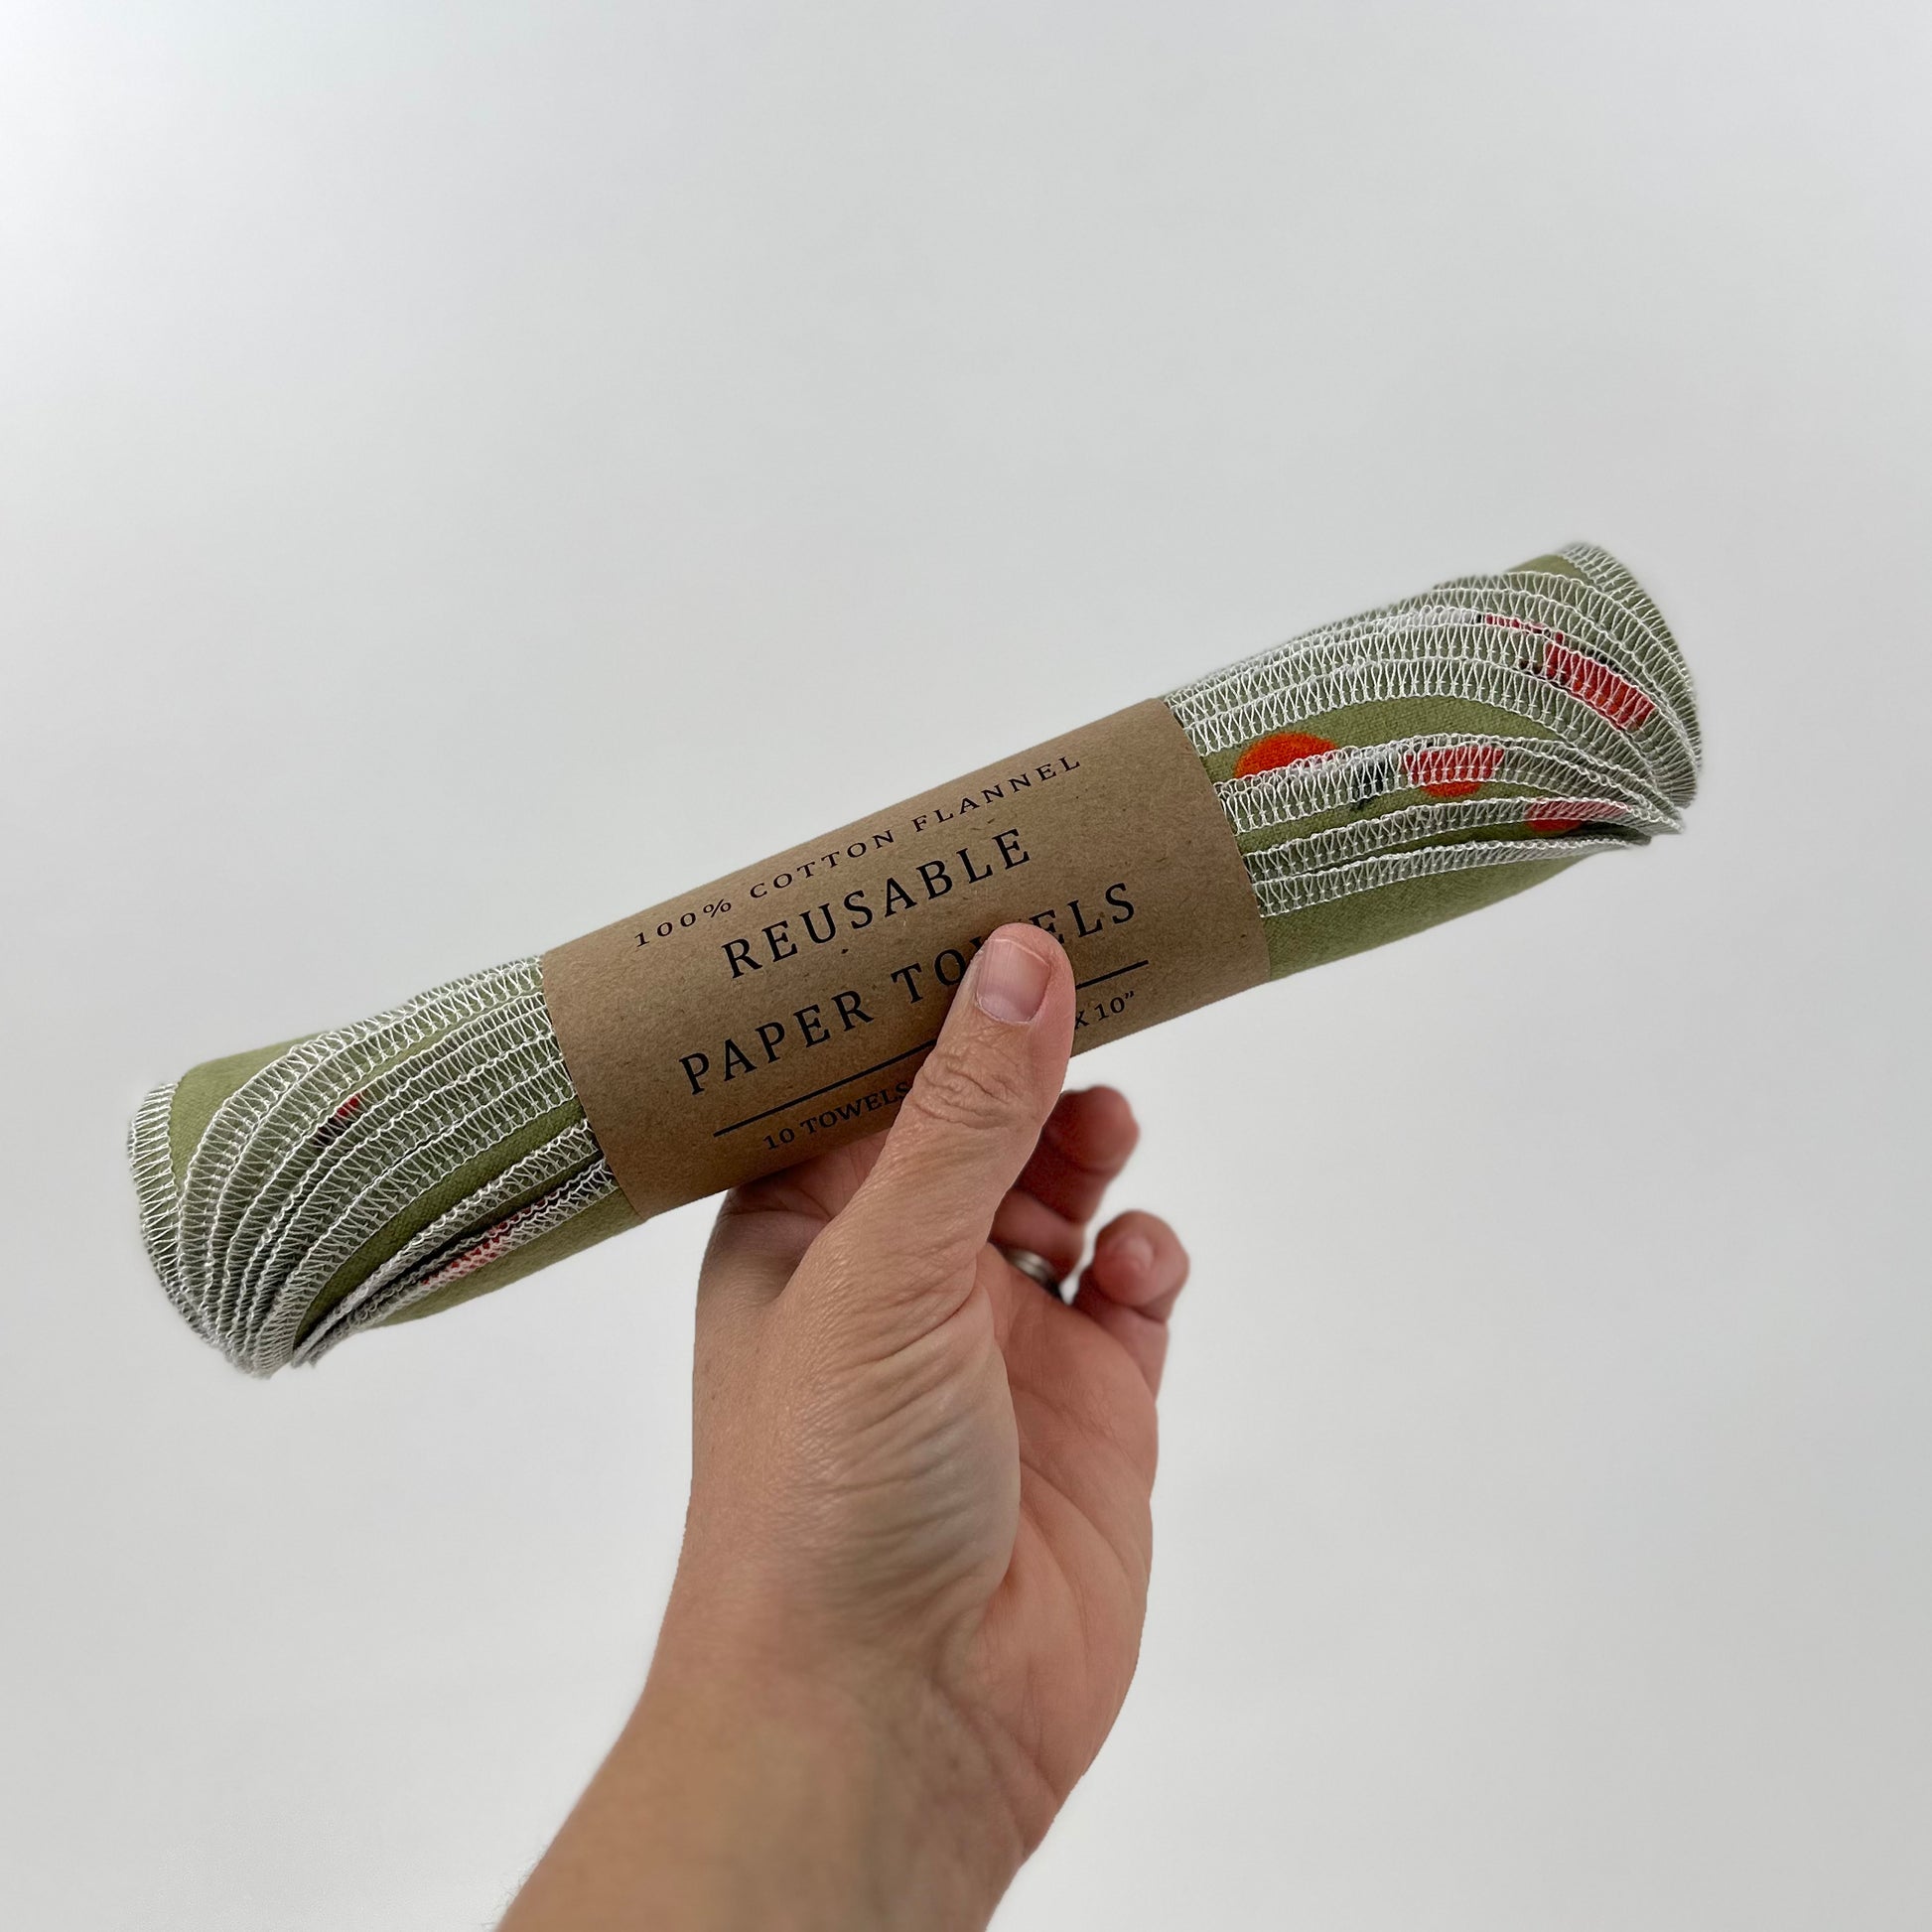 A packaged set of Miche Niche Reusable paper towels. The fabric is a sage green background with medium sized red apples.